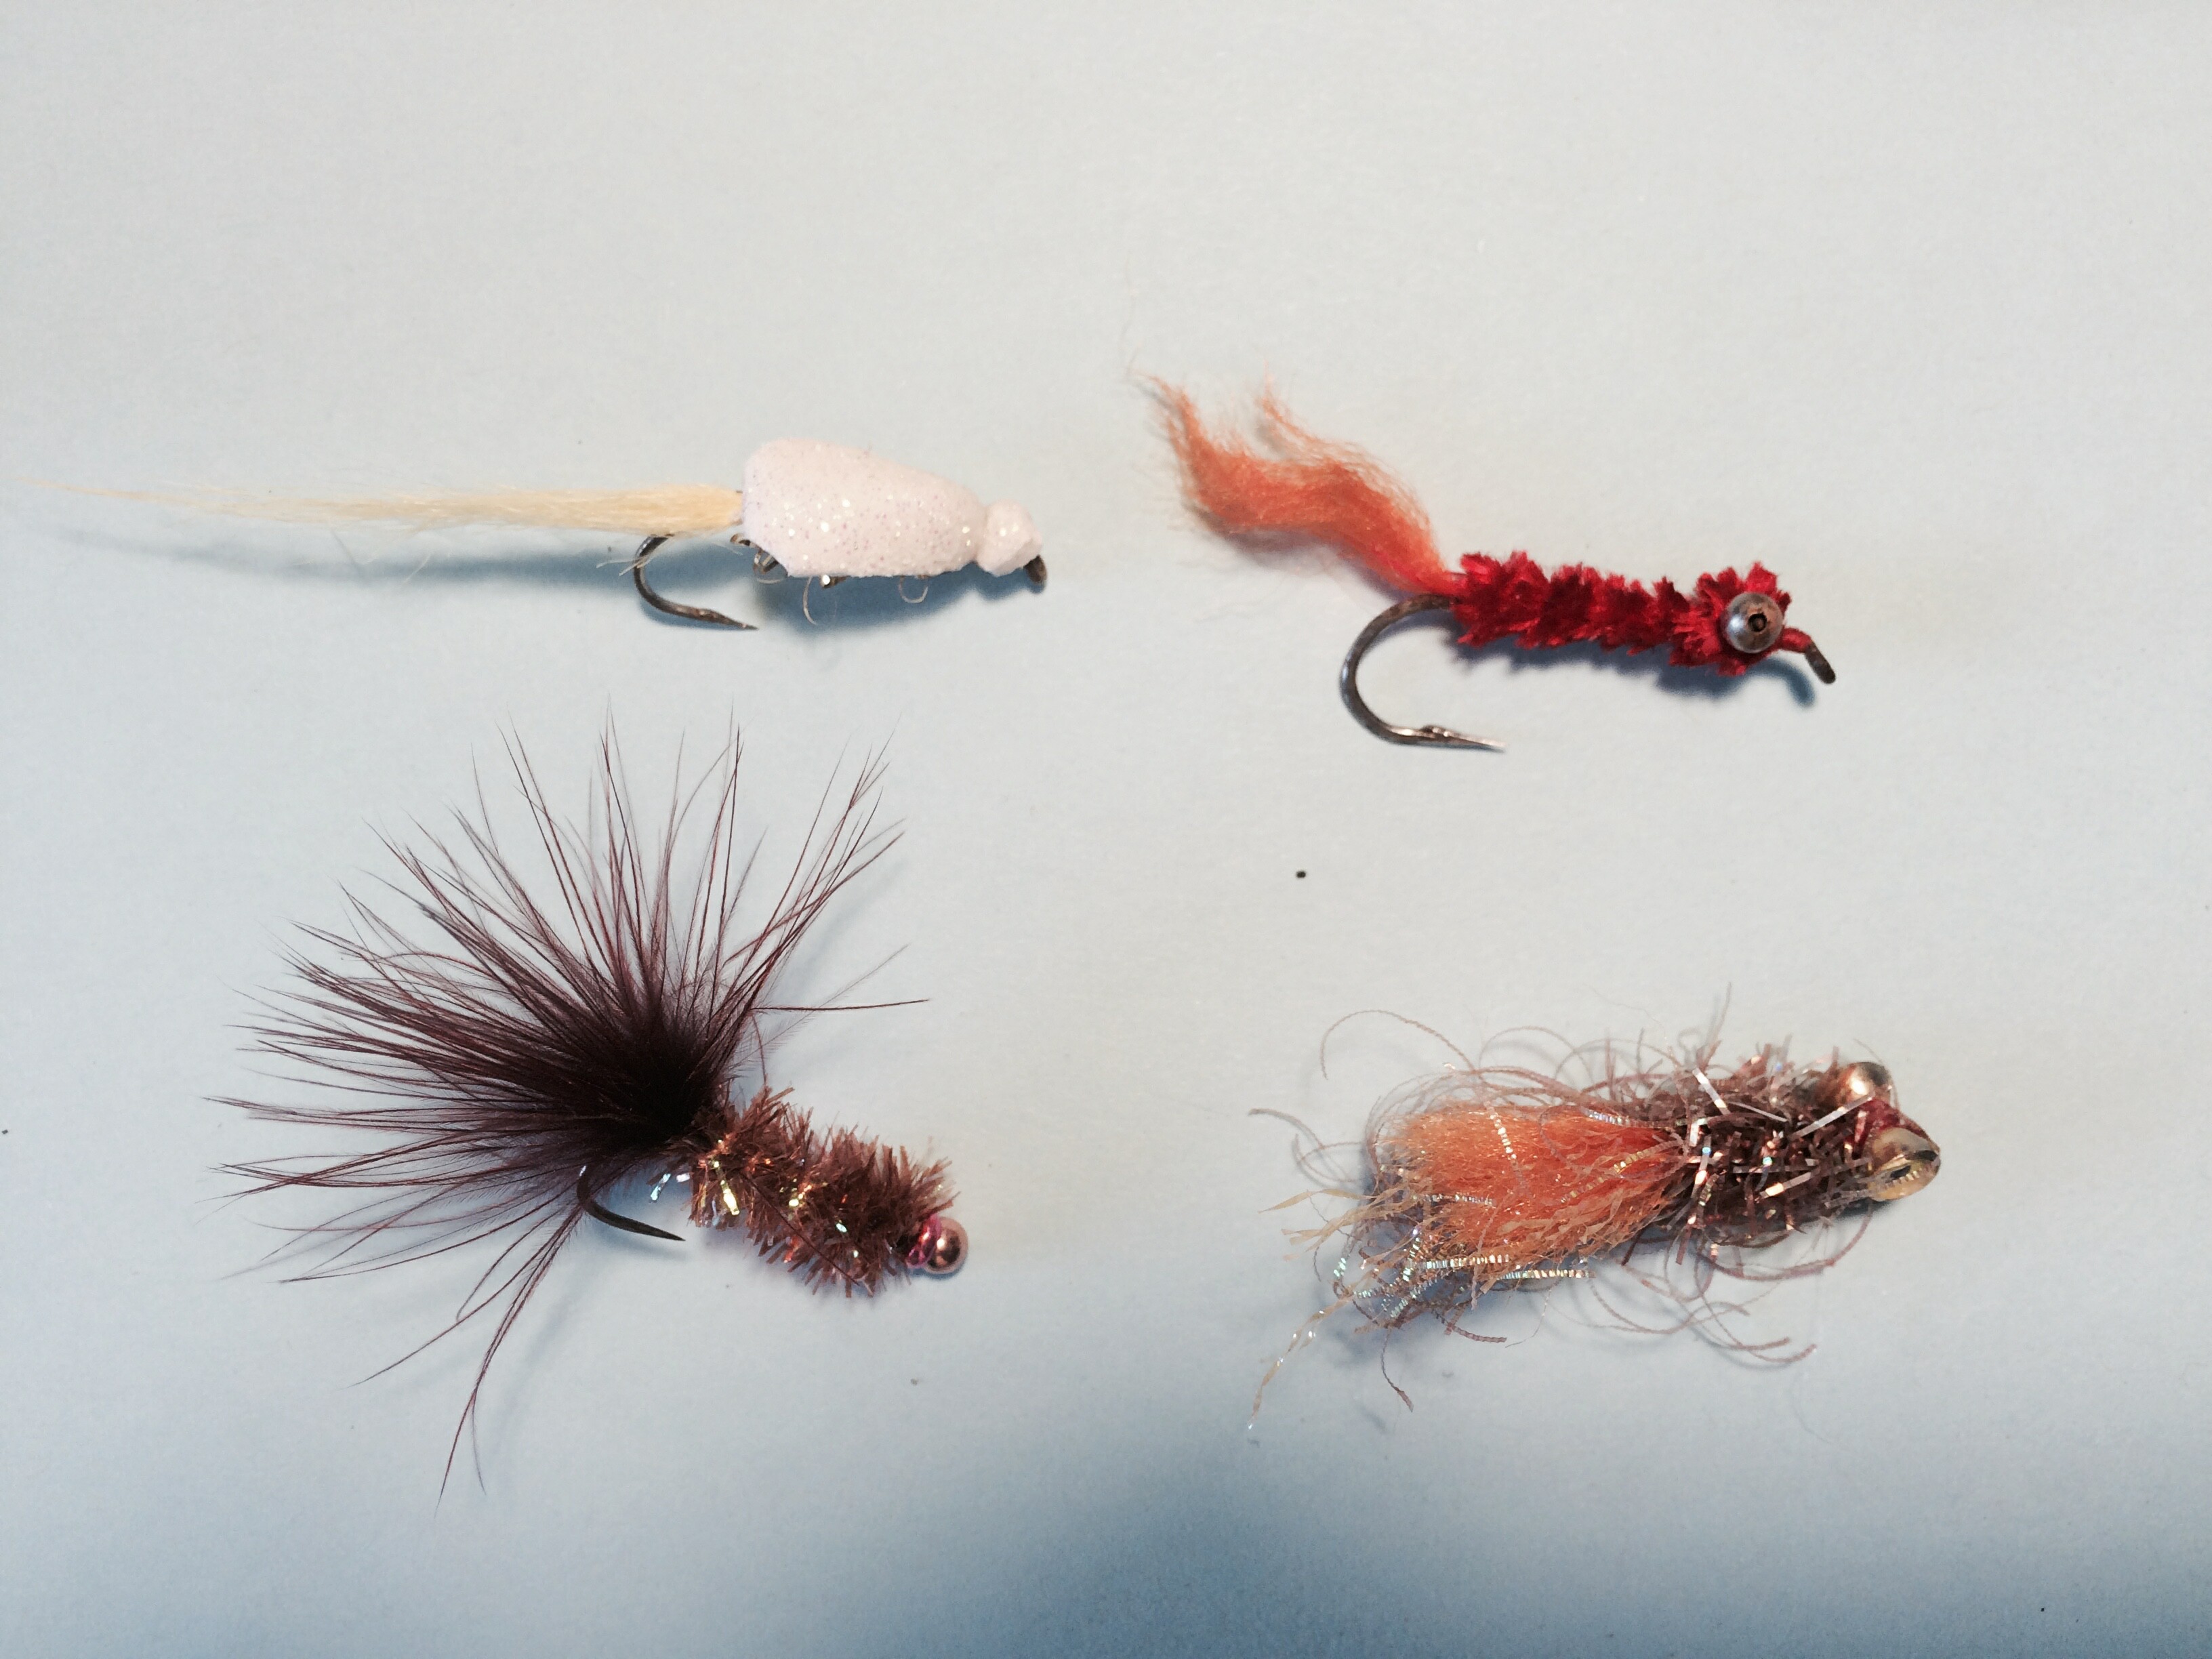 For anglers wanting to get their feet wet with saltwater fly